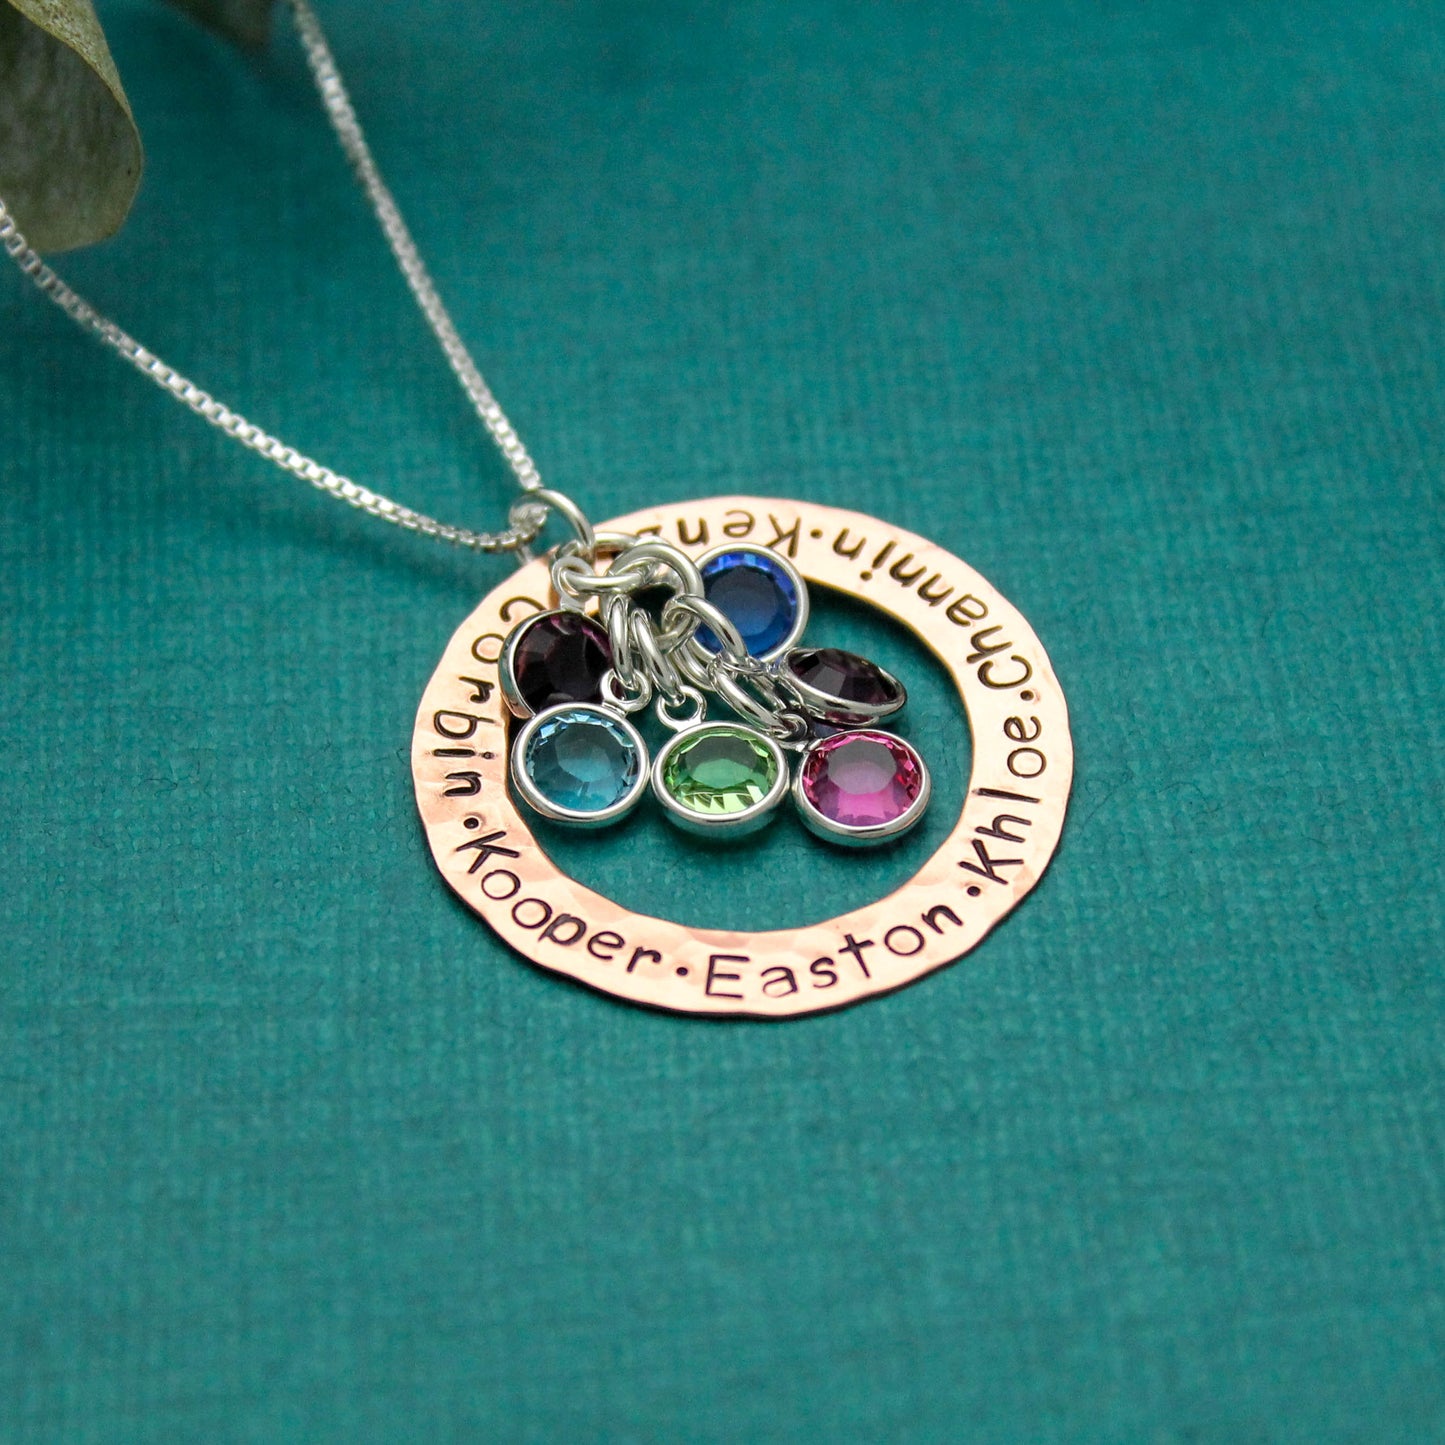 Personalized Mother Necklace, Copper Washer Mommy Necklace with Birthstones, Birthstone Jewelry, Mother's Day Gift, Hand Stamped Jewelry